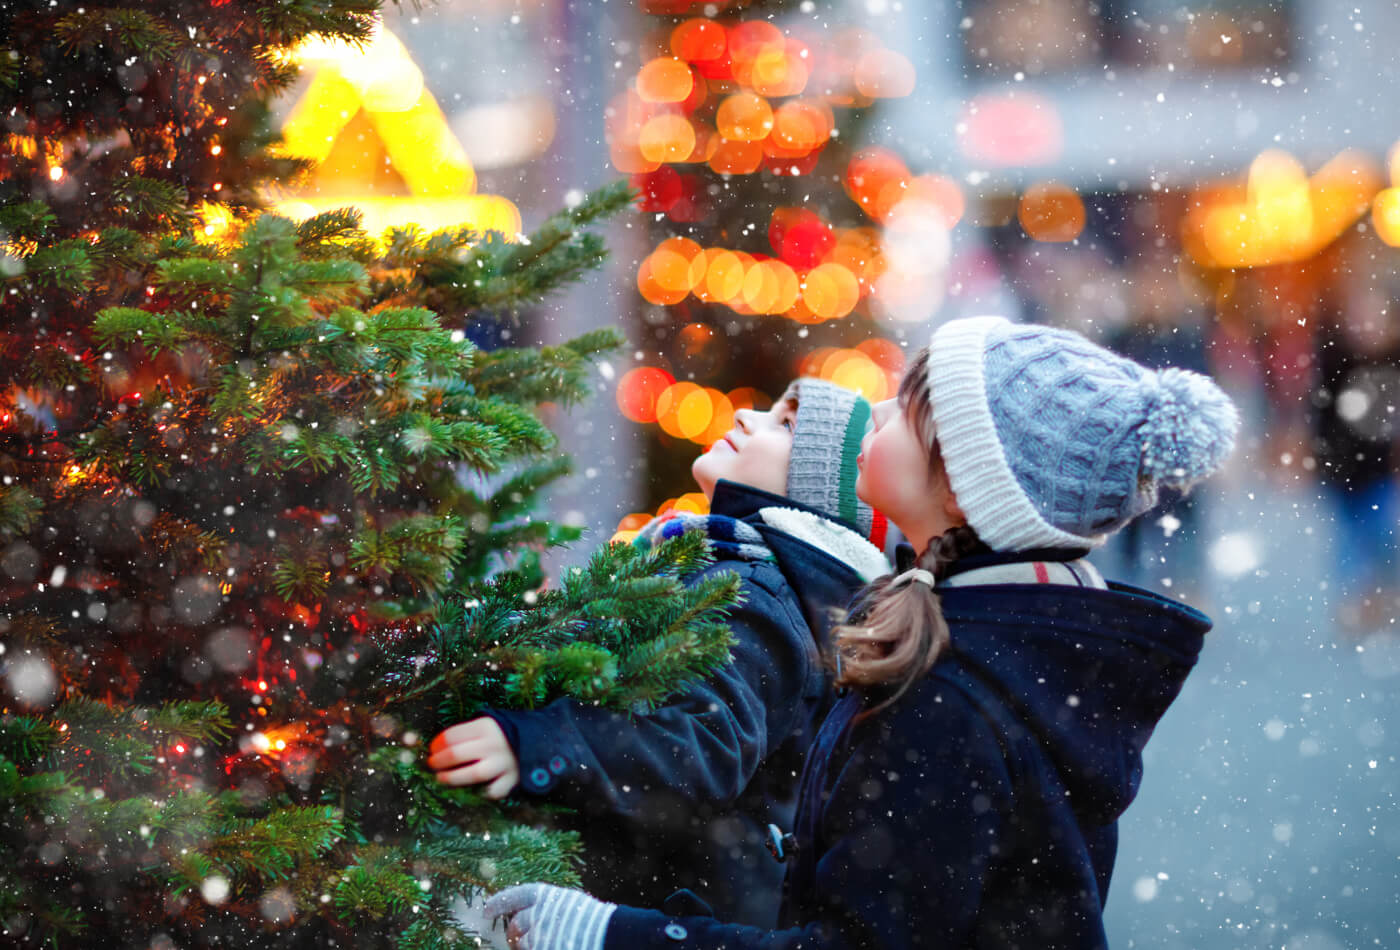 Two children looking up at a Christmas tree outside in the snow.